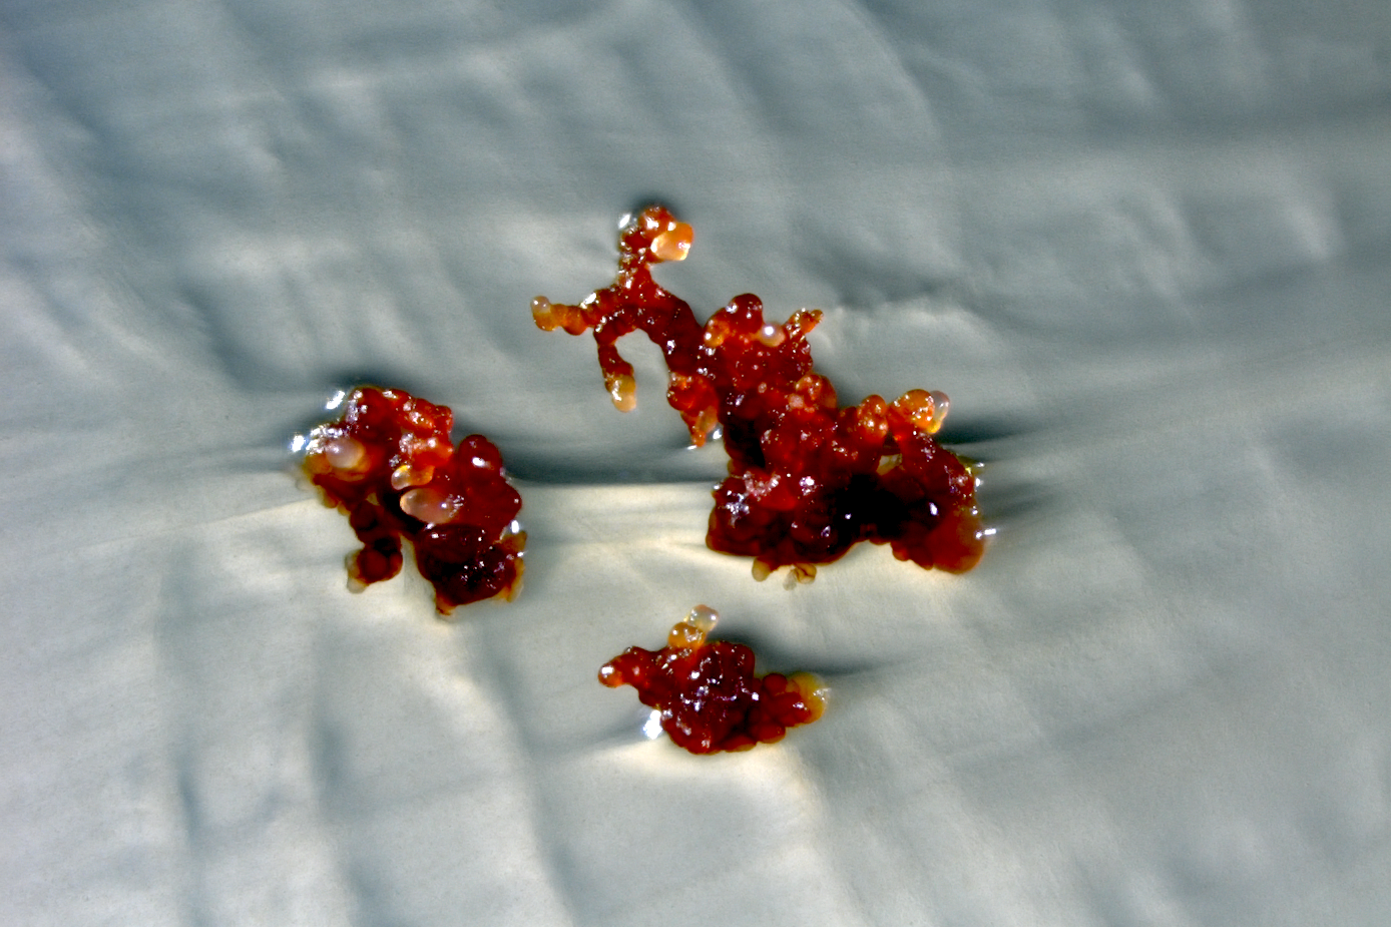 Stereomicroscopic image of Cystobacter violaceus in red.